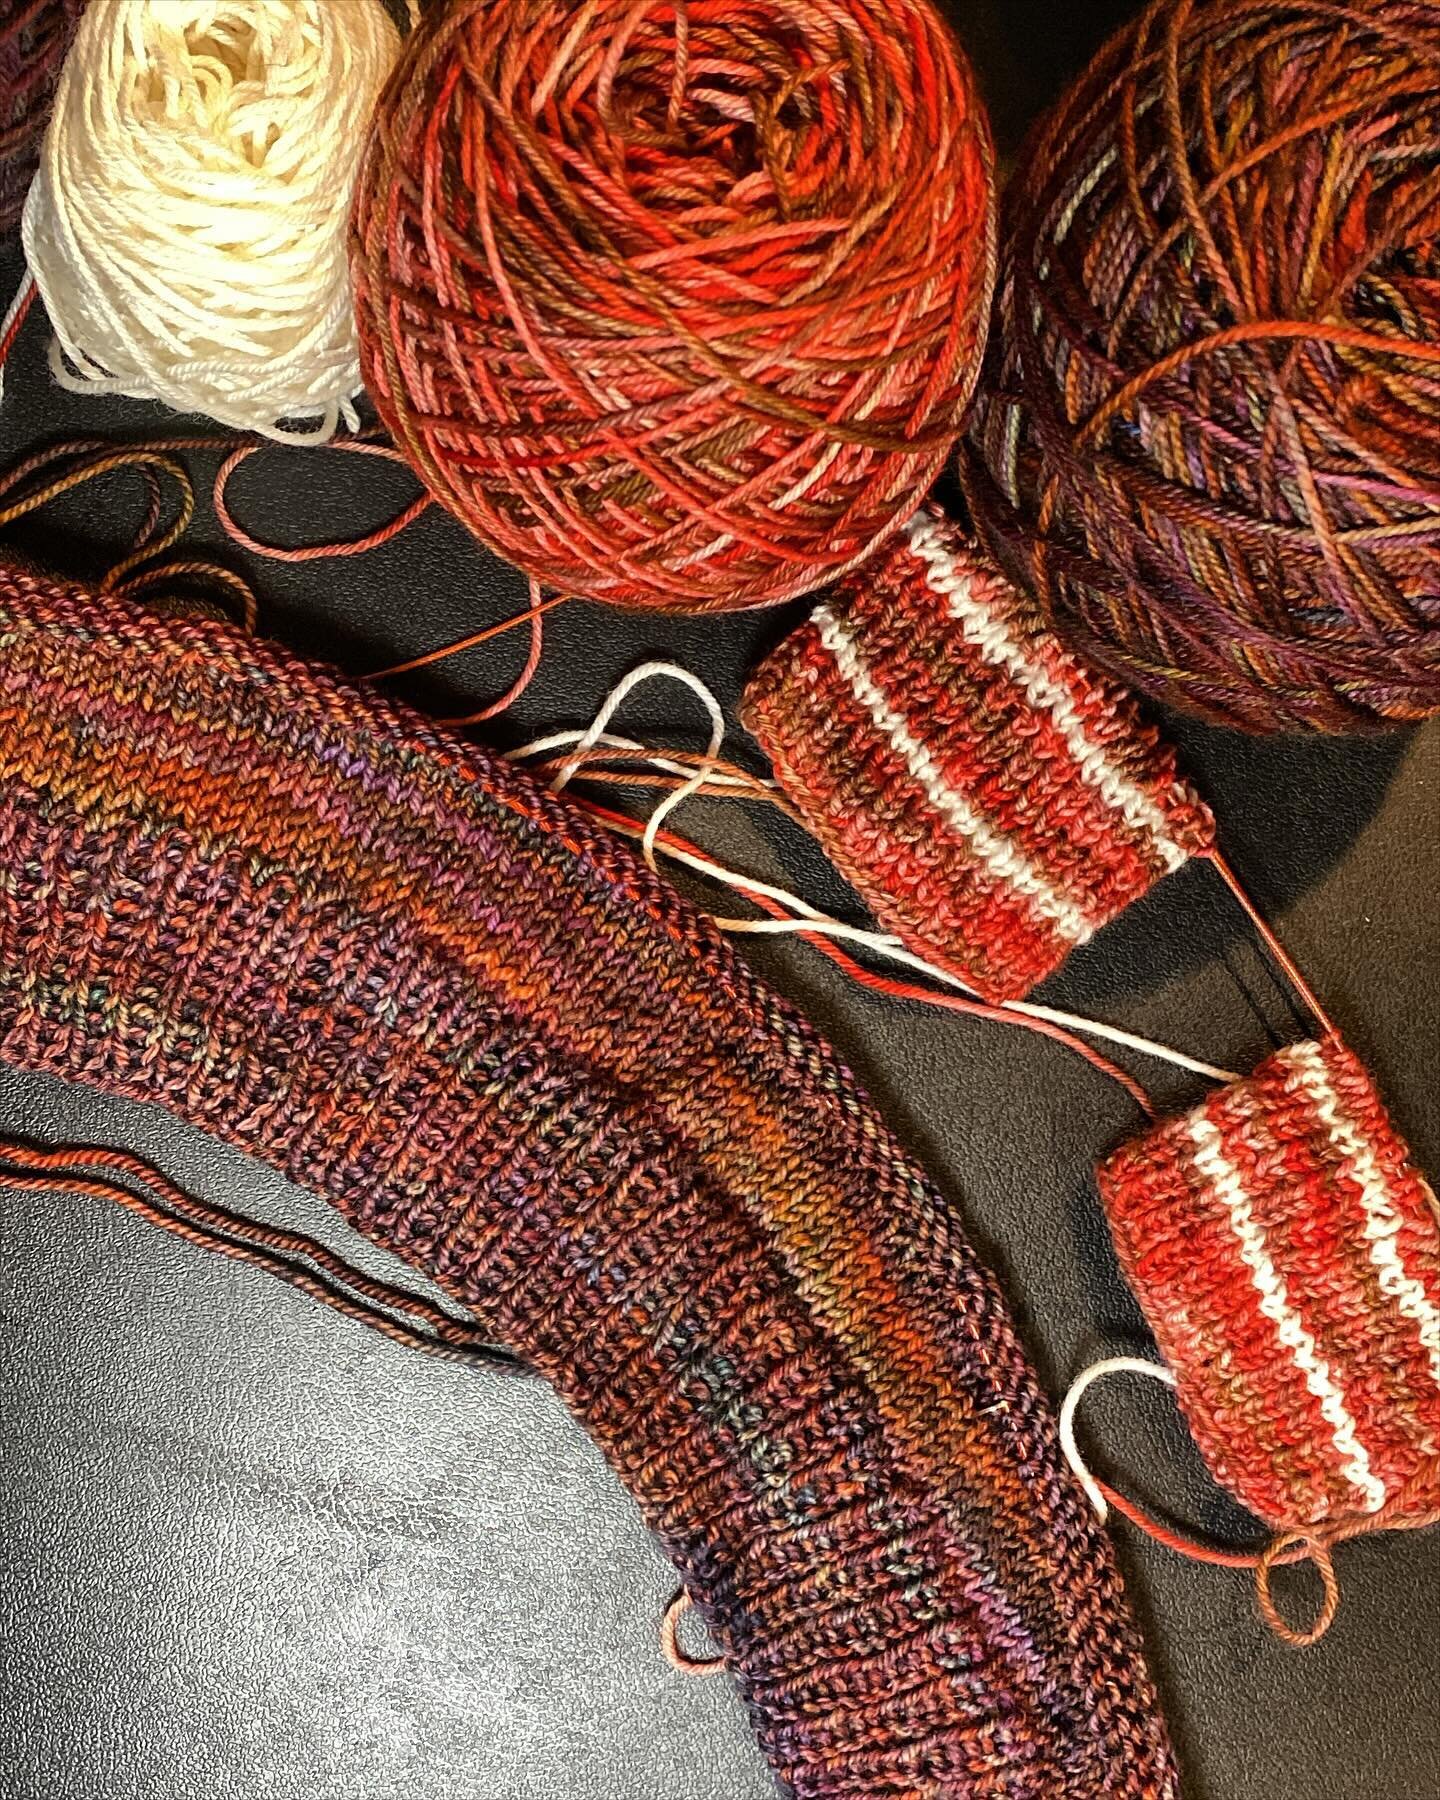 Haven&rsquo;t had a ton of time to work on WIPs this past week, but I&rsquo;m excited to be working on these projects!

I&rsquo;ve never done striped socks two at a time before because I figured I&rsquo;d get too tangled (which I am), but it&rsquo;s 